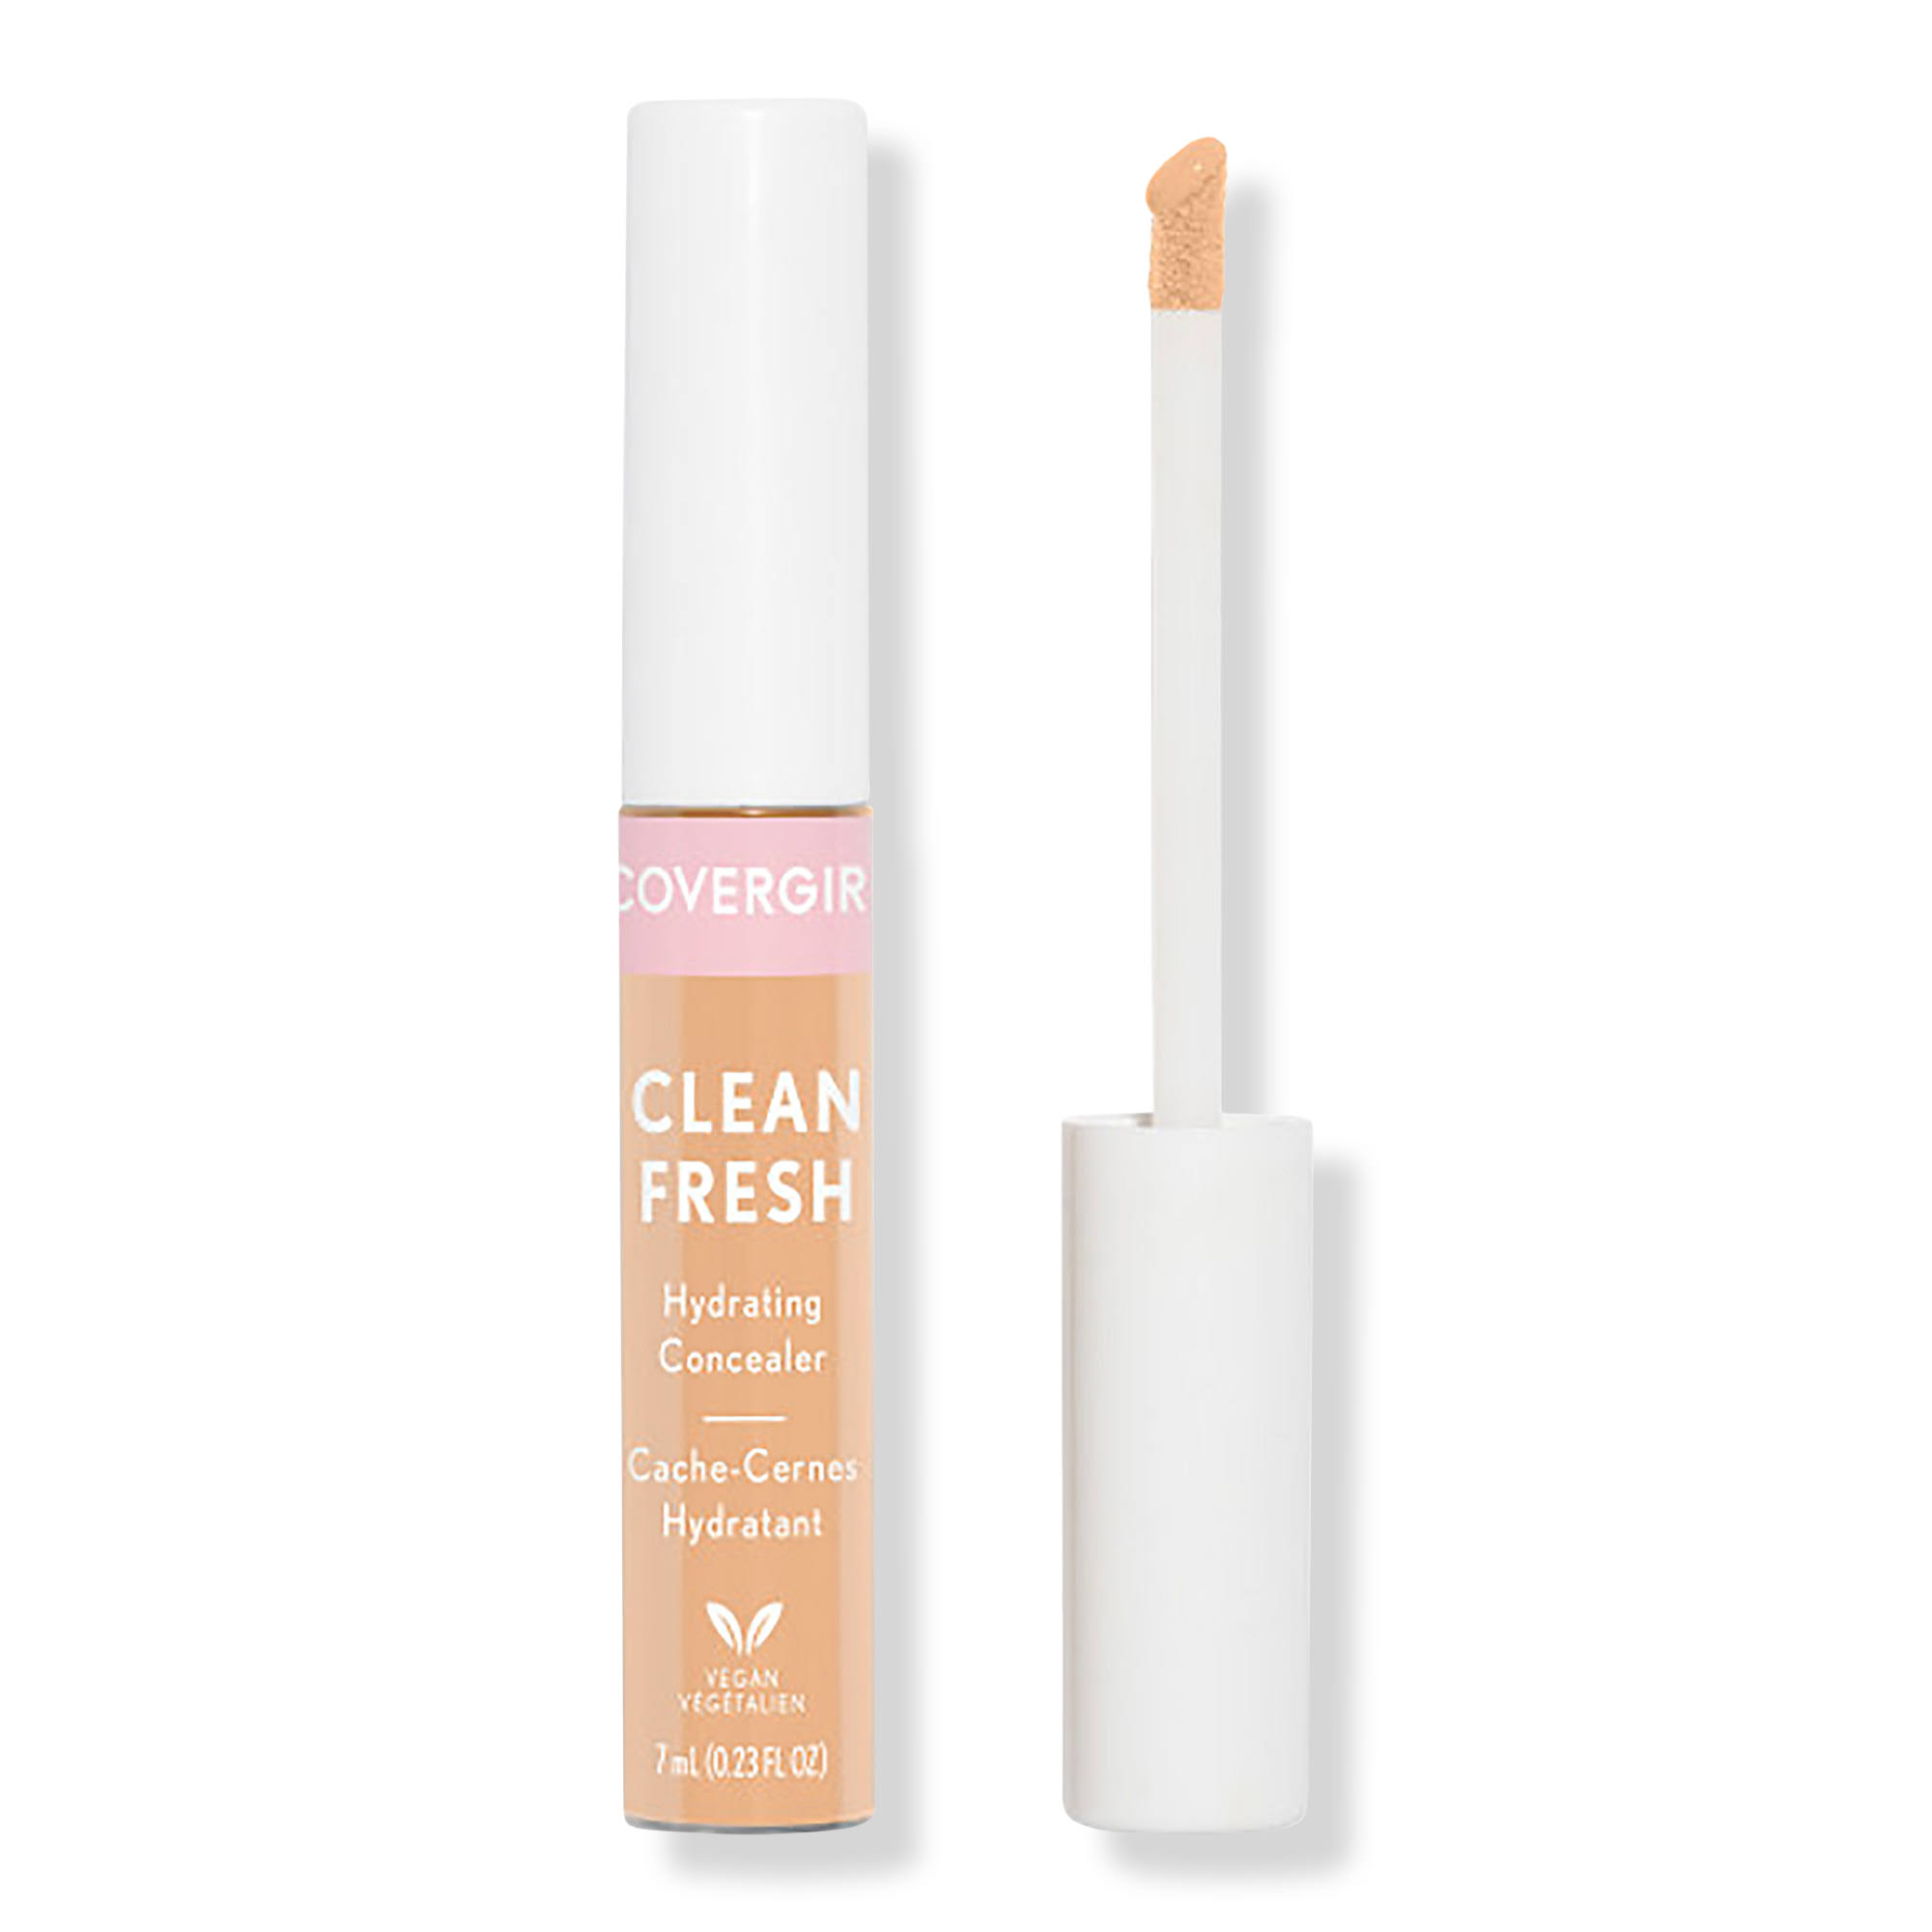 Covergirl Clean Fresh Hydrating Concealer 0.23 oz (Various Shades) Porcelain